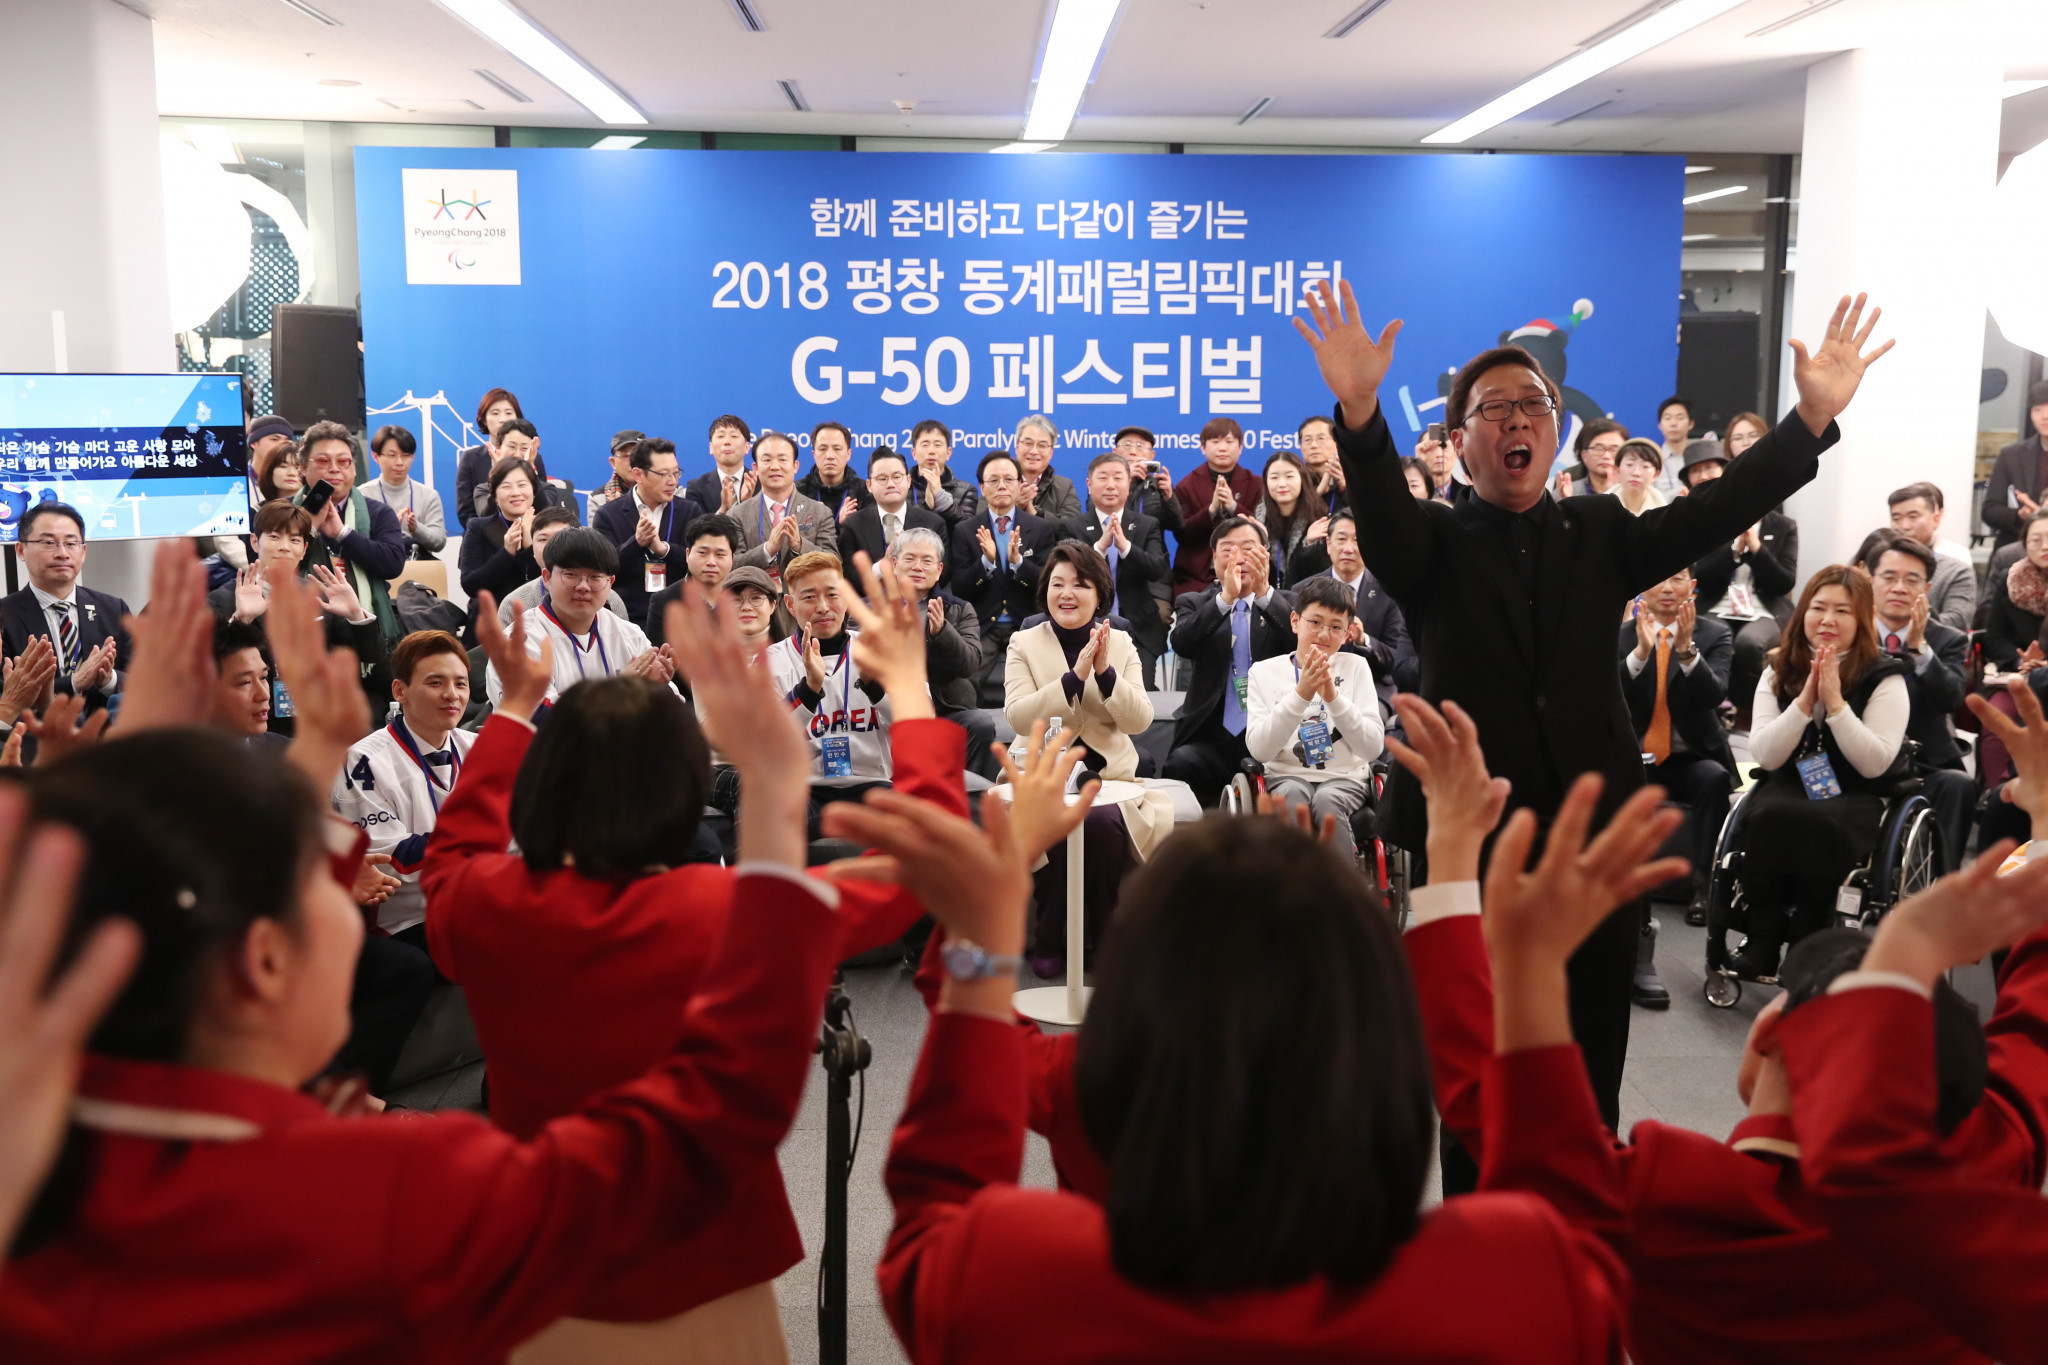 The Voices of Seoul choir, in red, entertained the crowd at the event ©Pyeongchang 2018